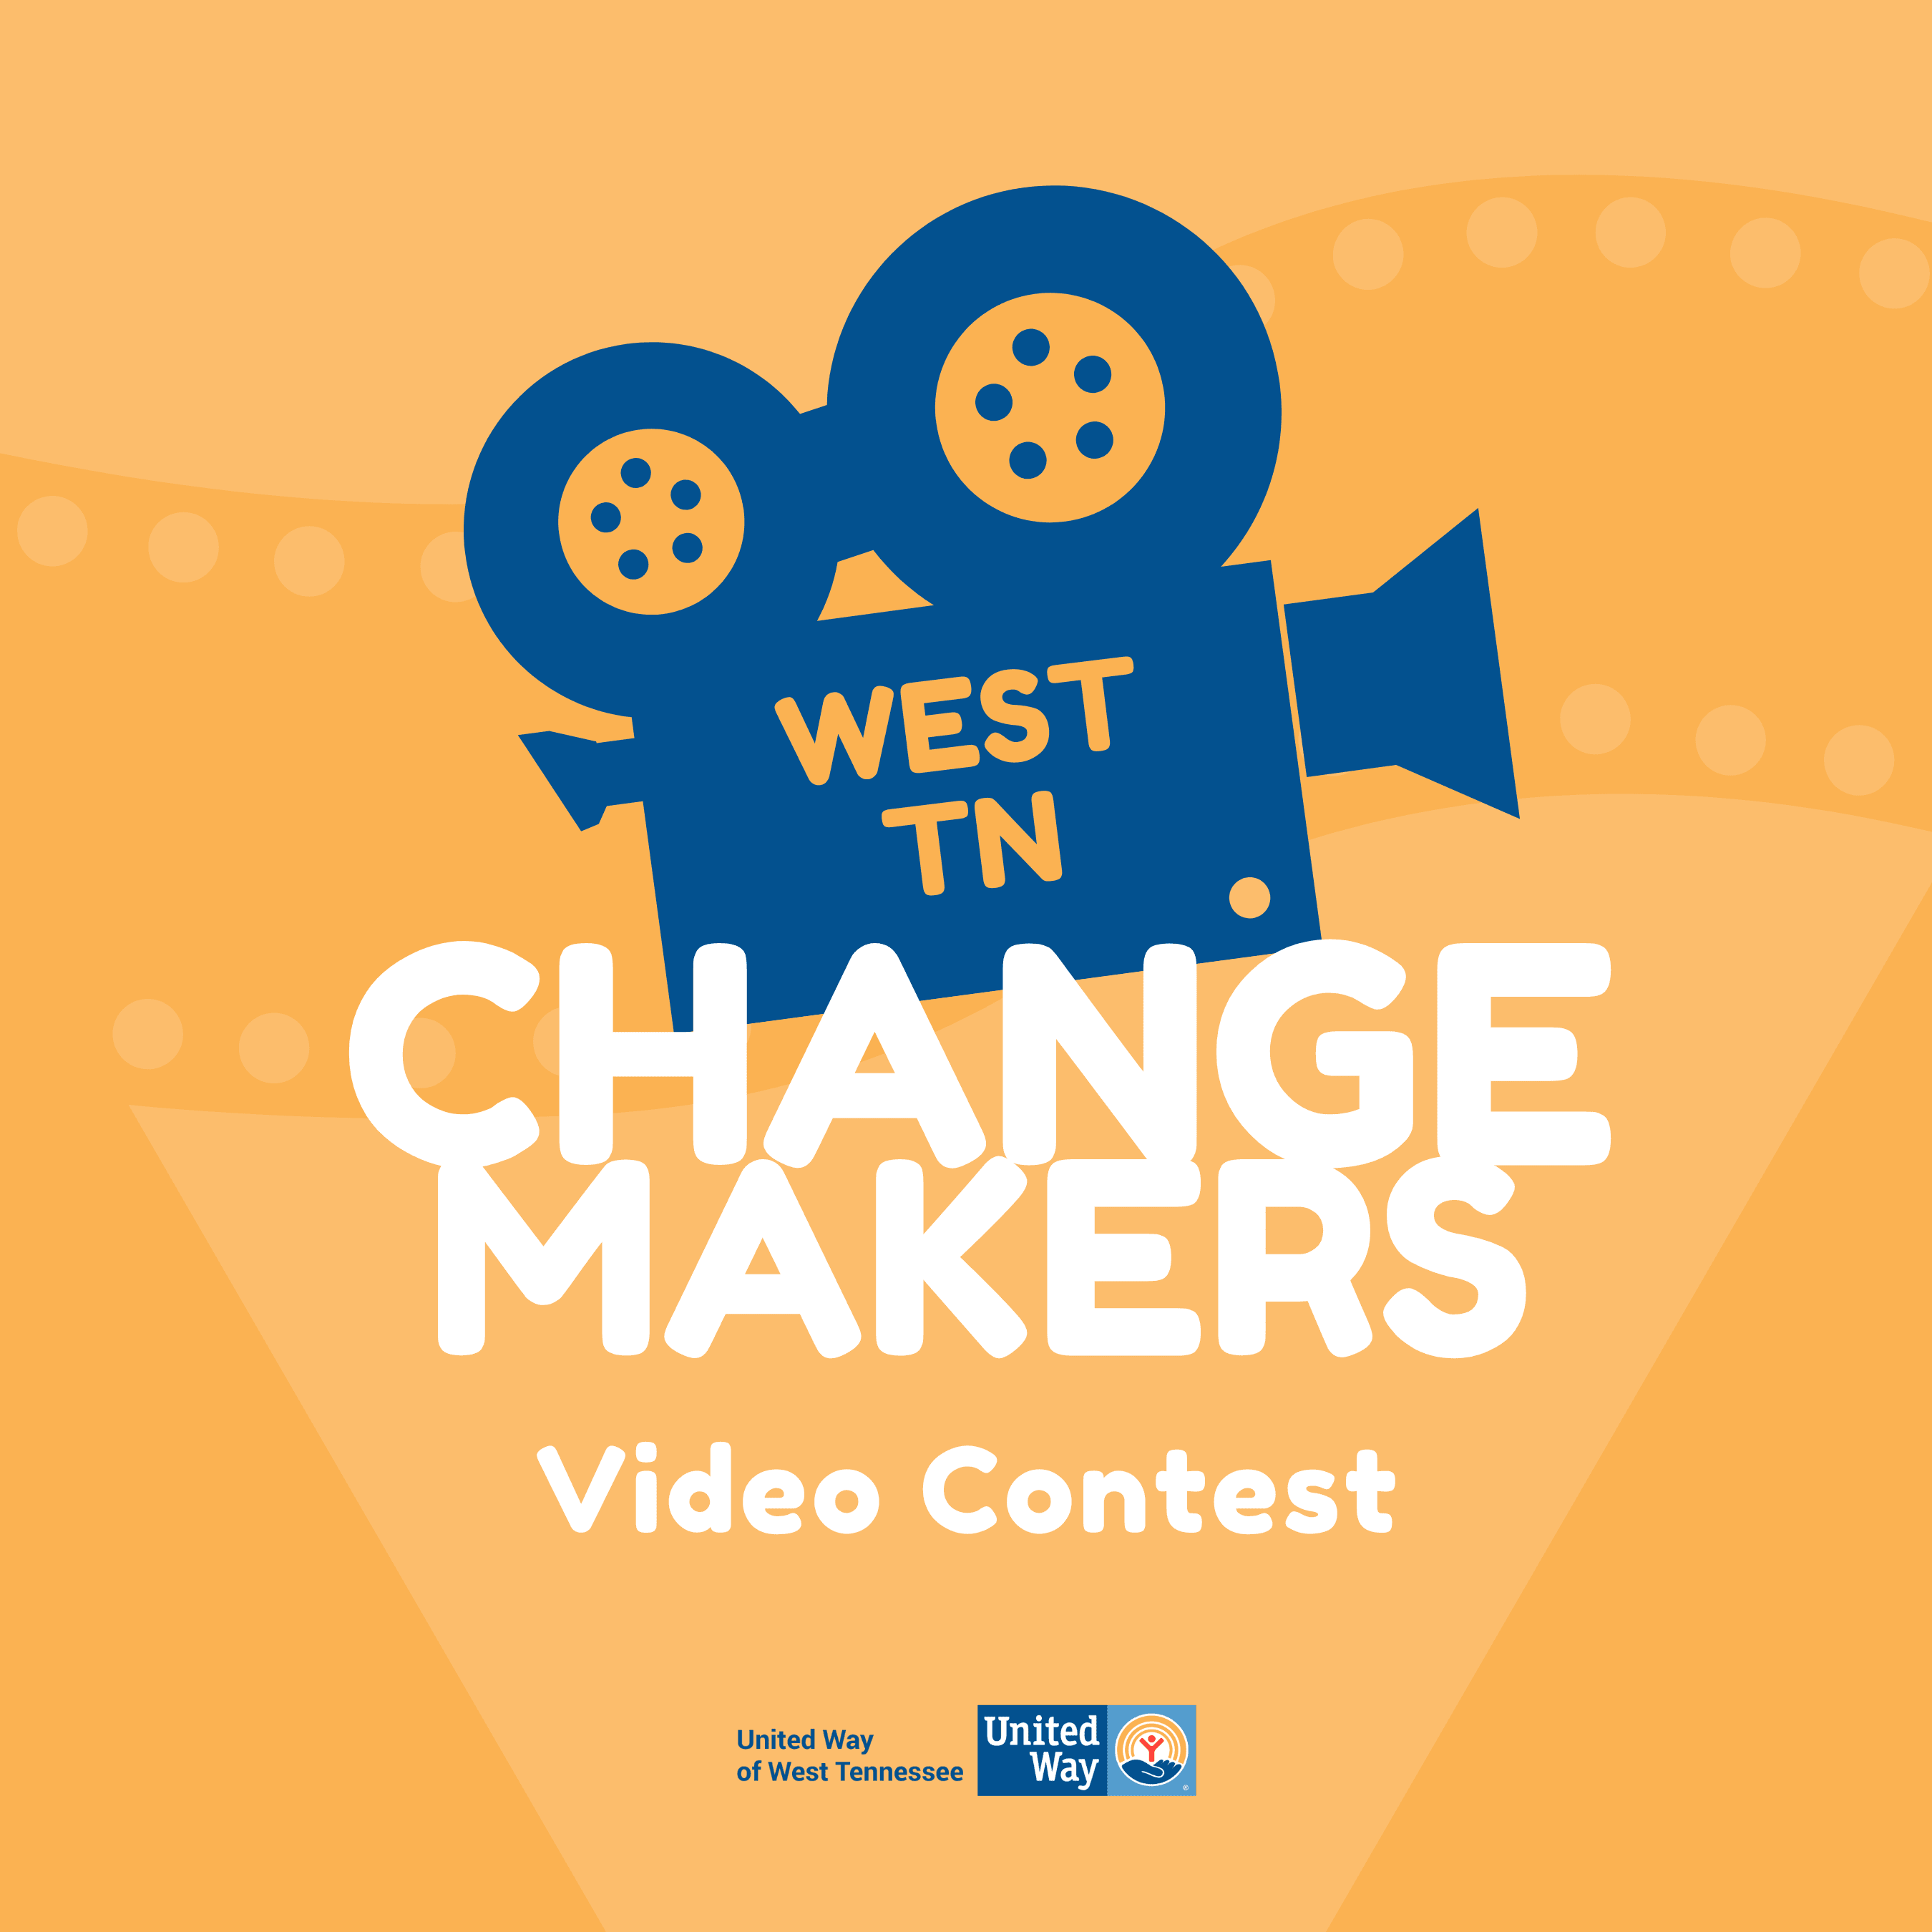 West TN Change Makers Video Contest